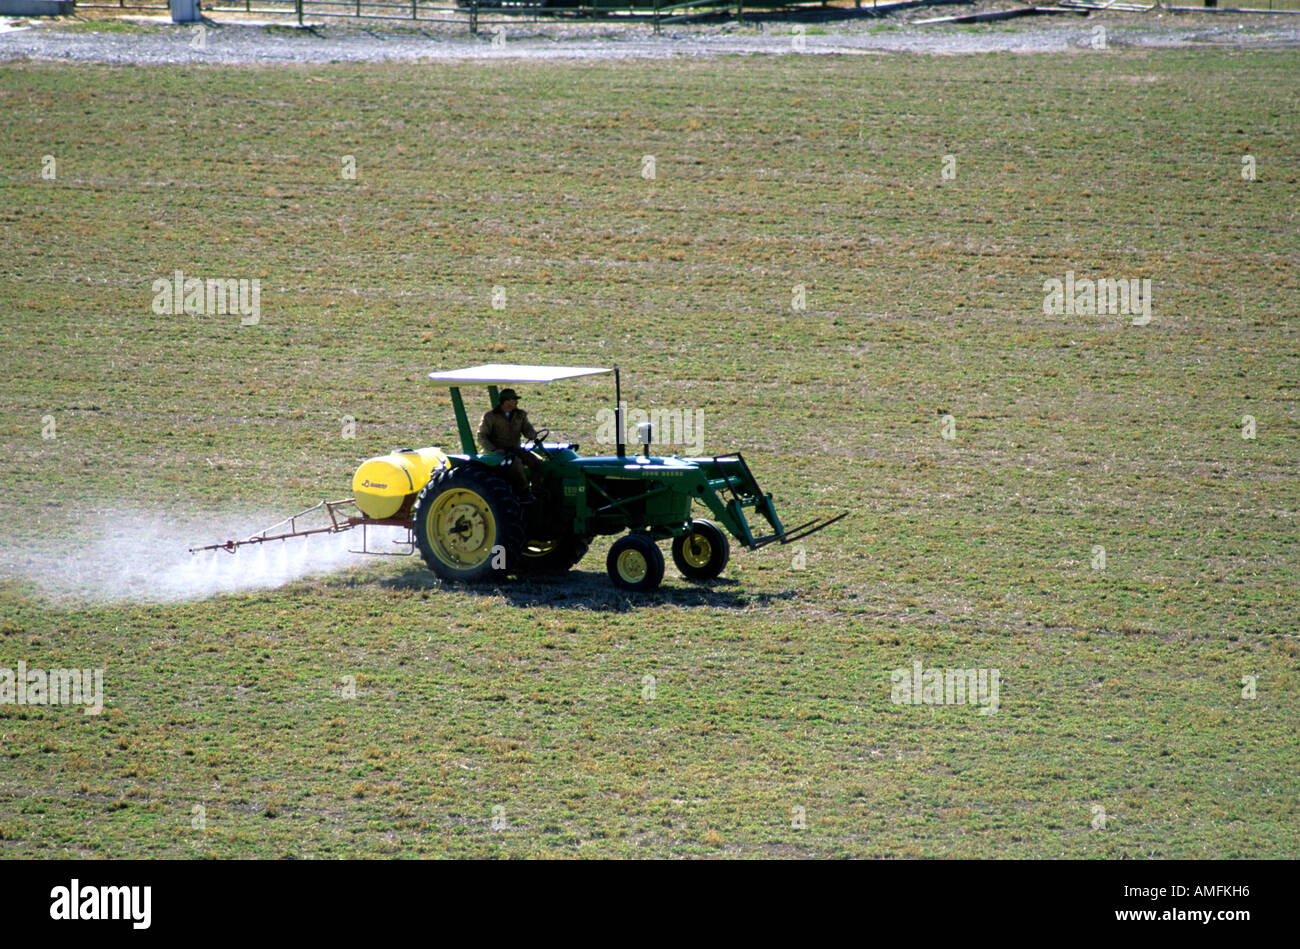 Tractor spraying herbicide on a field. Stock Photo